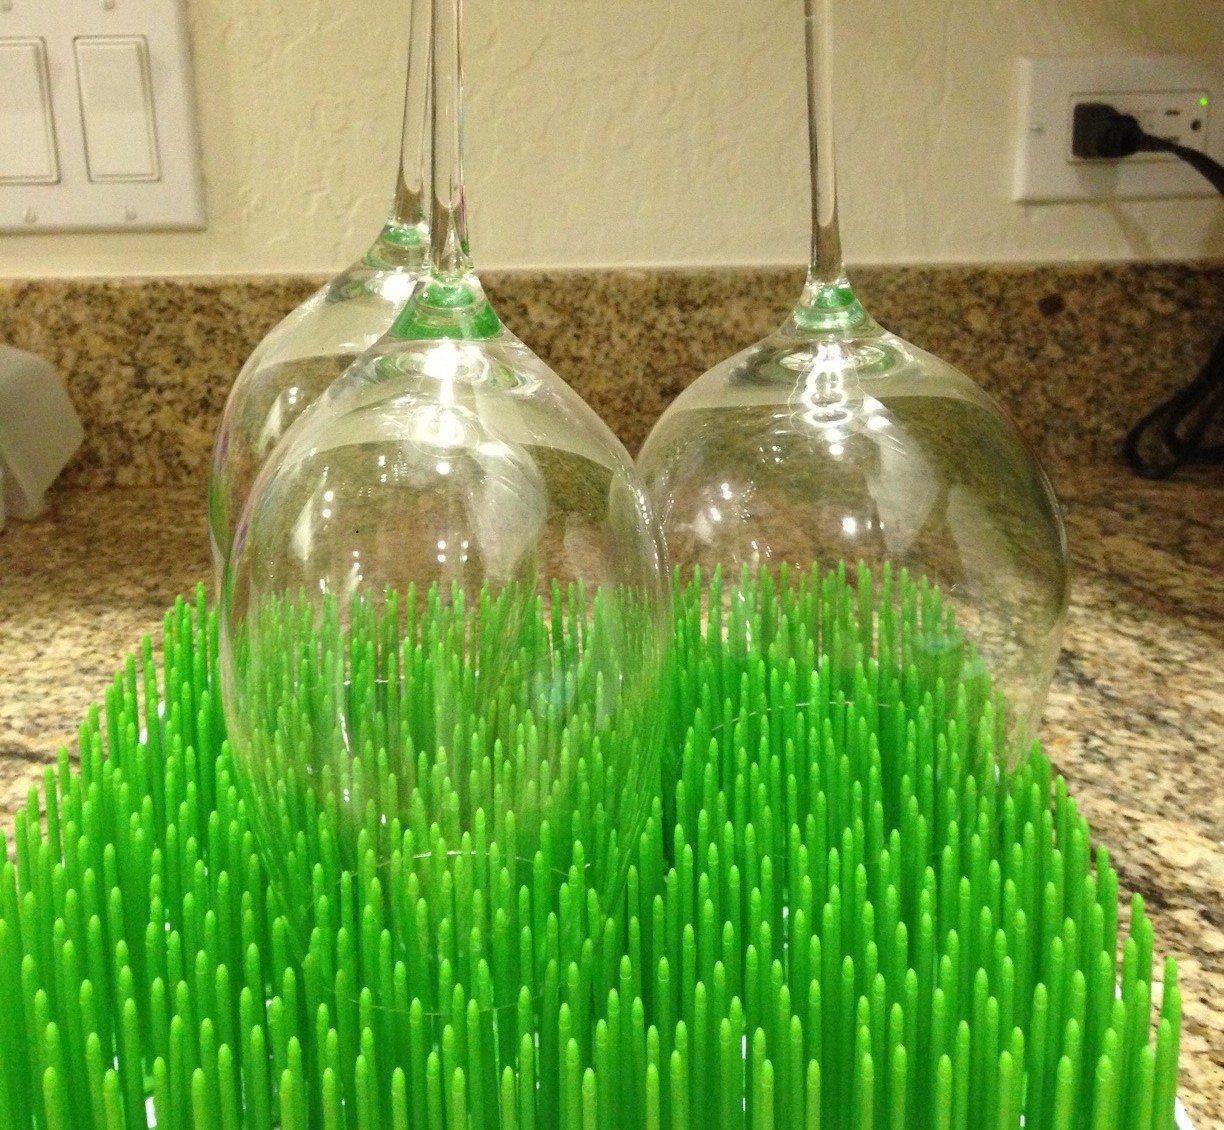 Today S Hint How To Make Baby Bottle Drying Racks Worth The Money